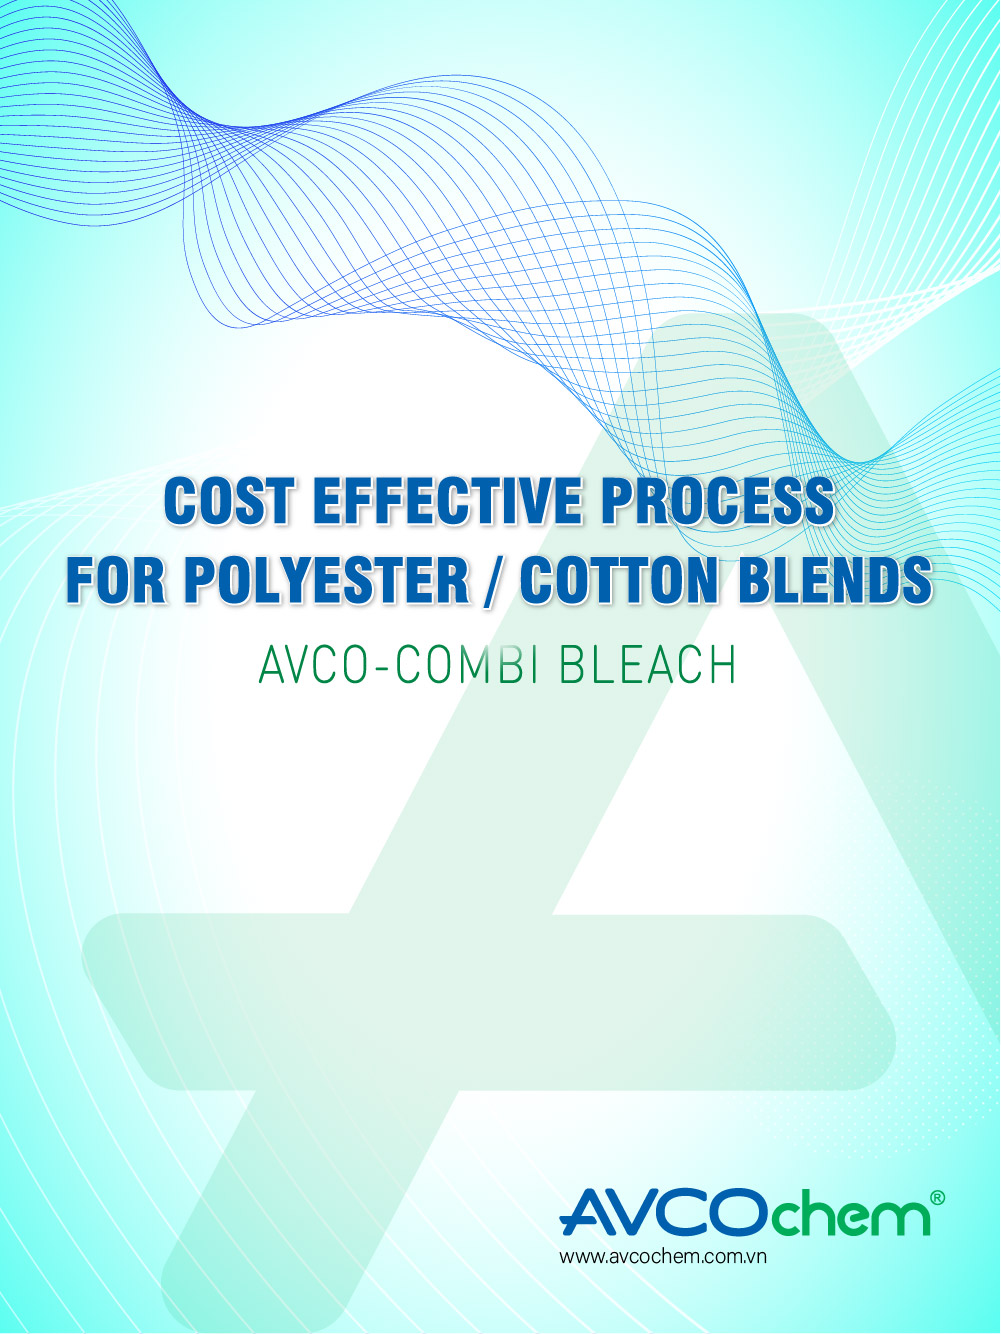 COST EFFECTIVE PROCESS FOR POLYESTER & COTTON BLENDS